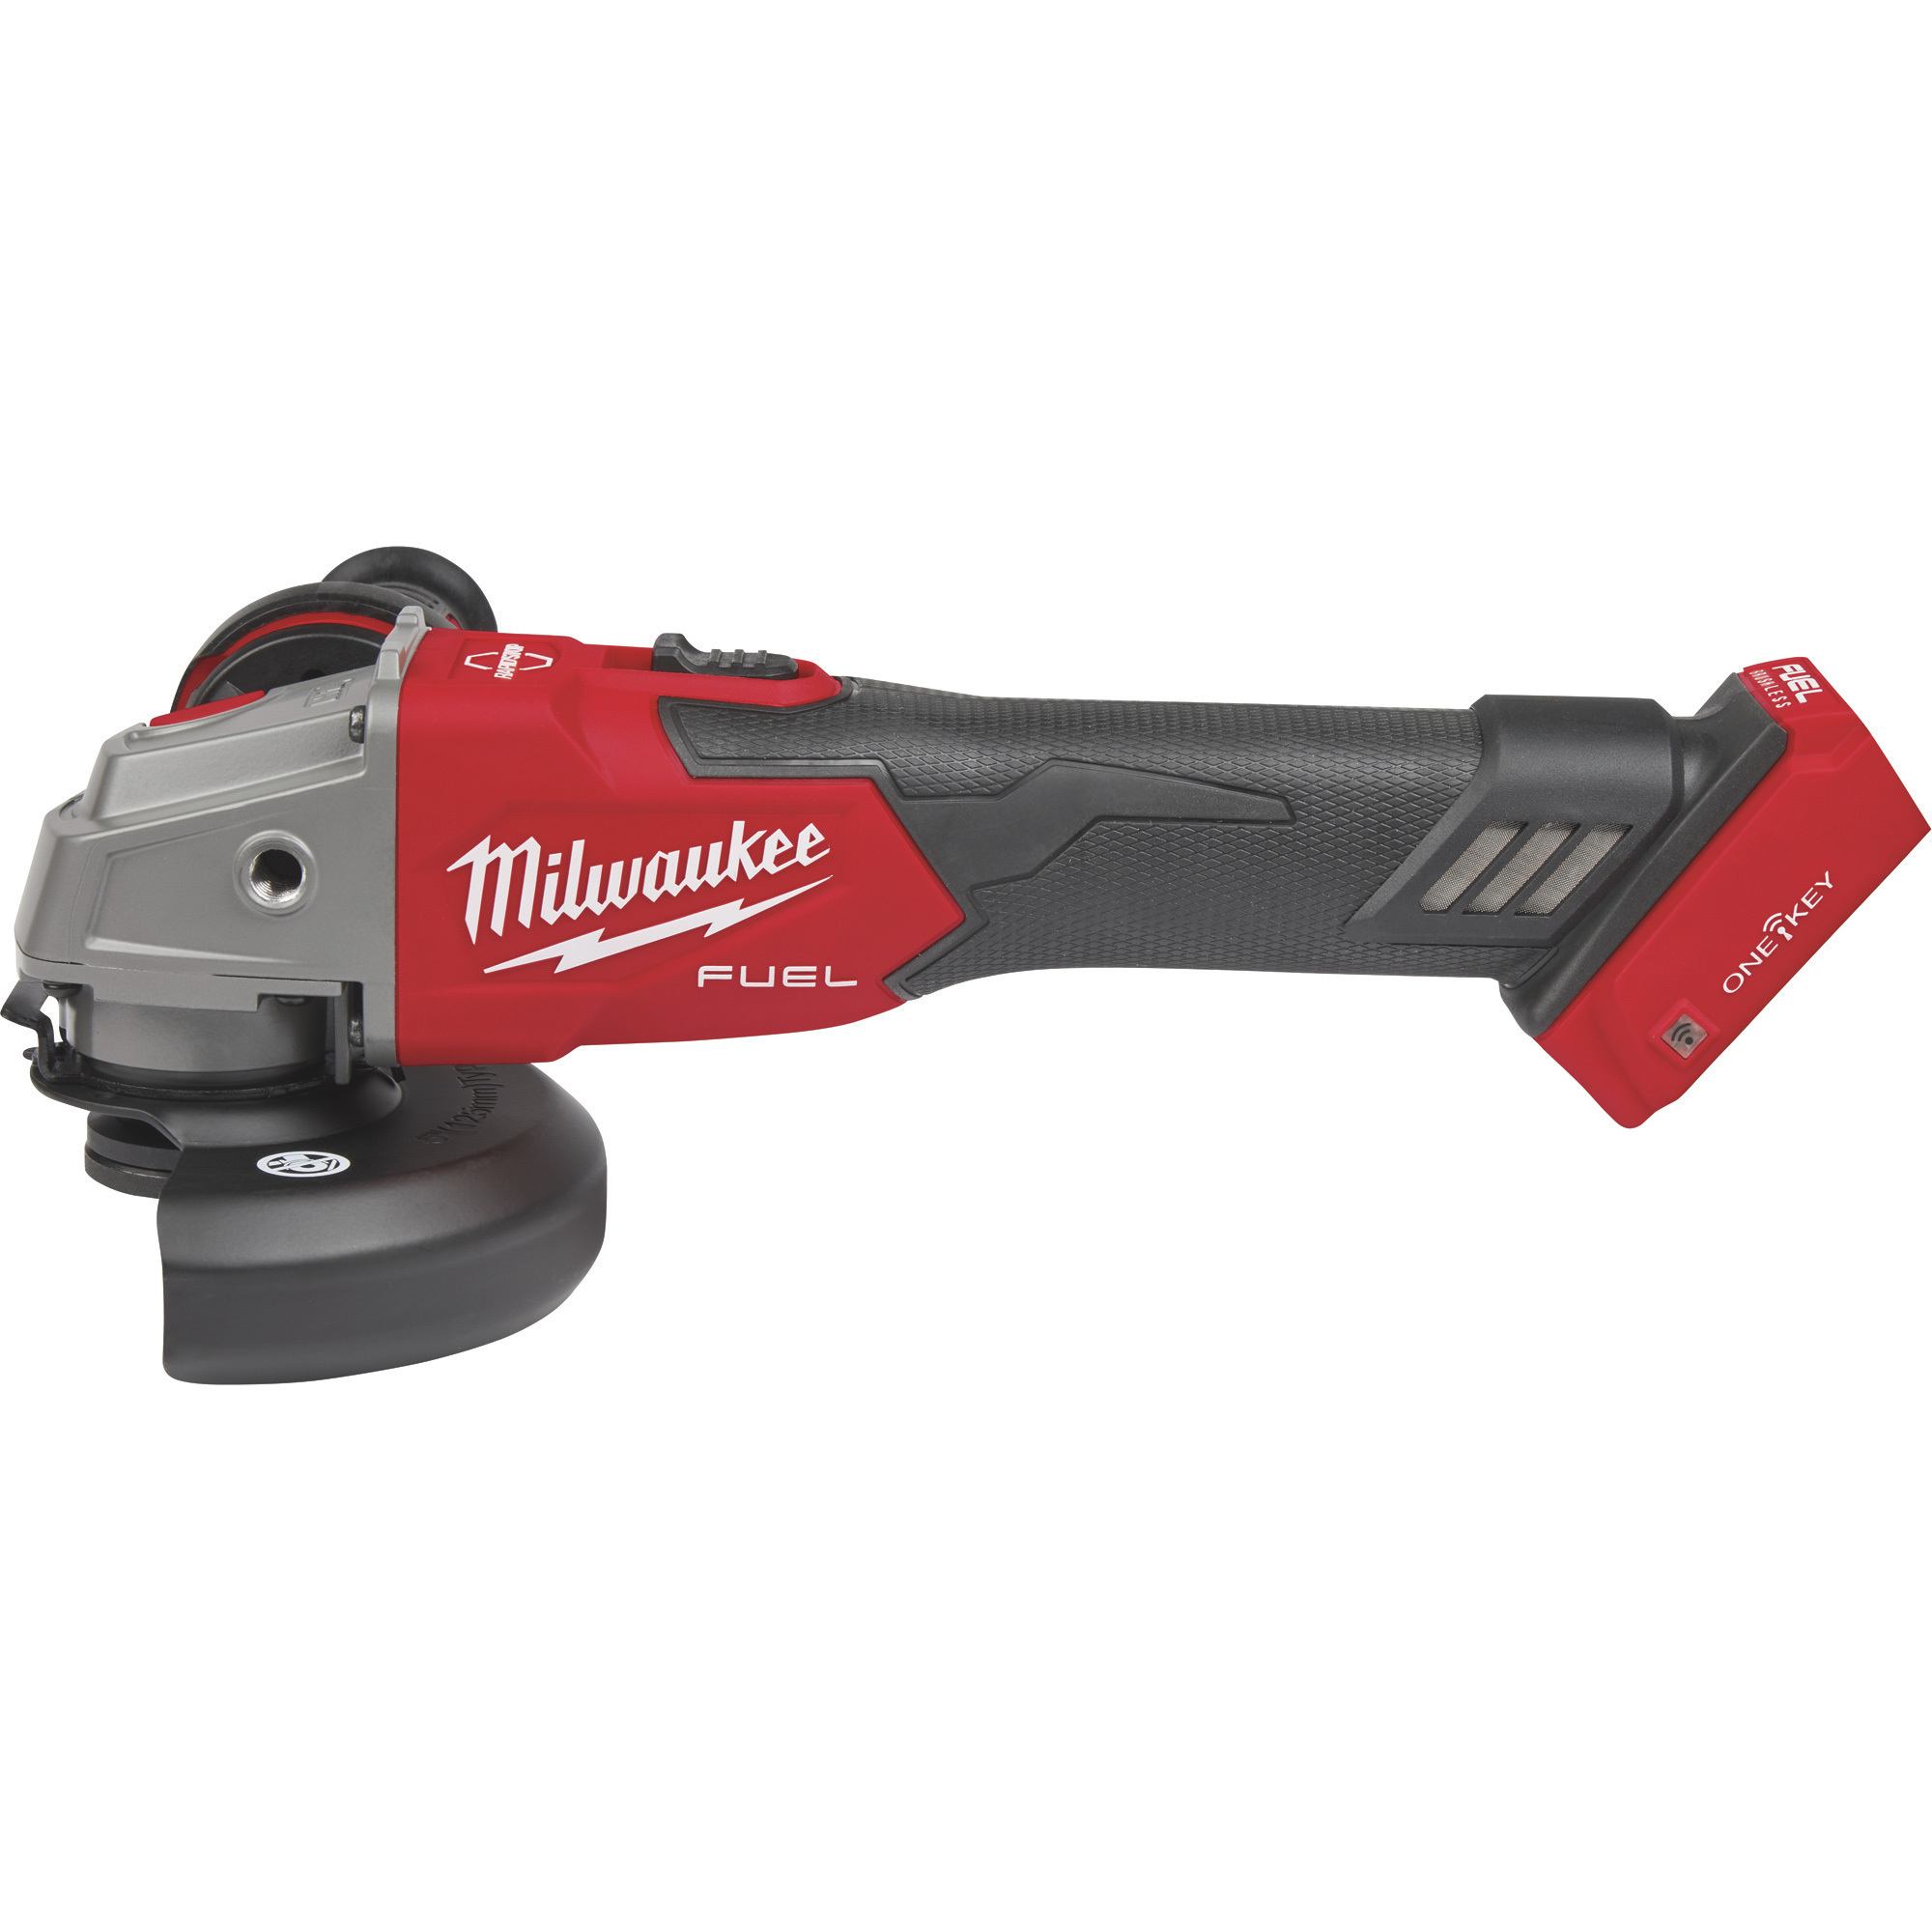 Milwaukee M18 FUEL 4-1/2Inch/5Inch Braking Grinder with One-Key Slide Switch, Lock-On Kit,Tool Only, Model 2883-20